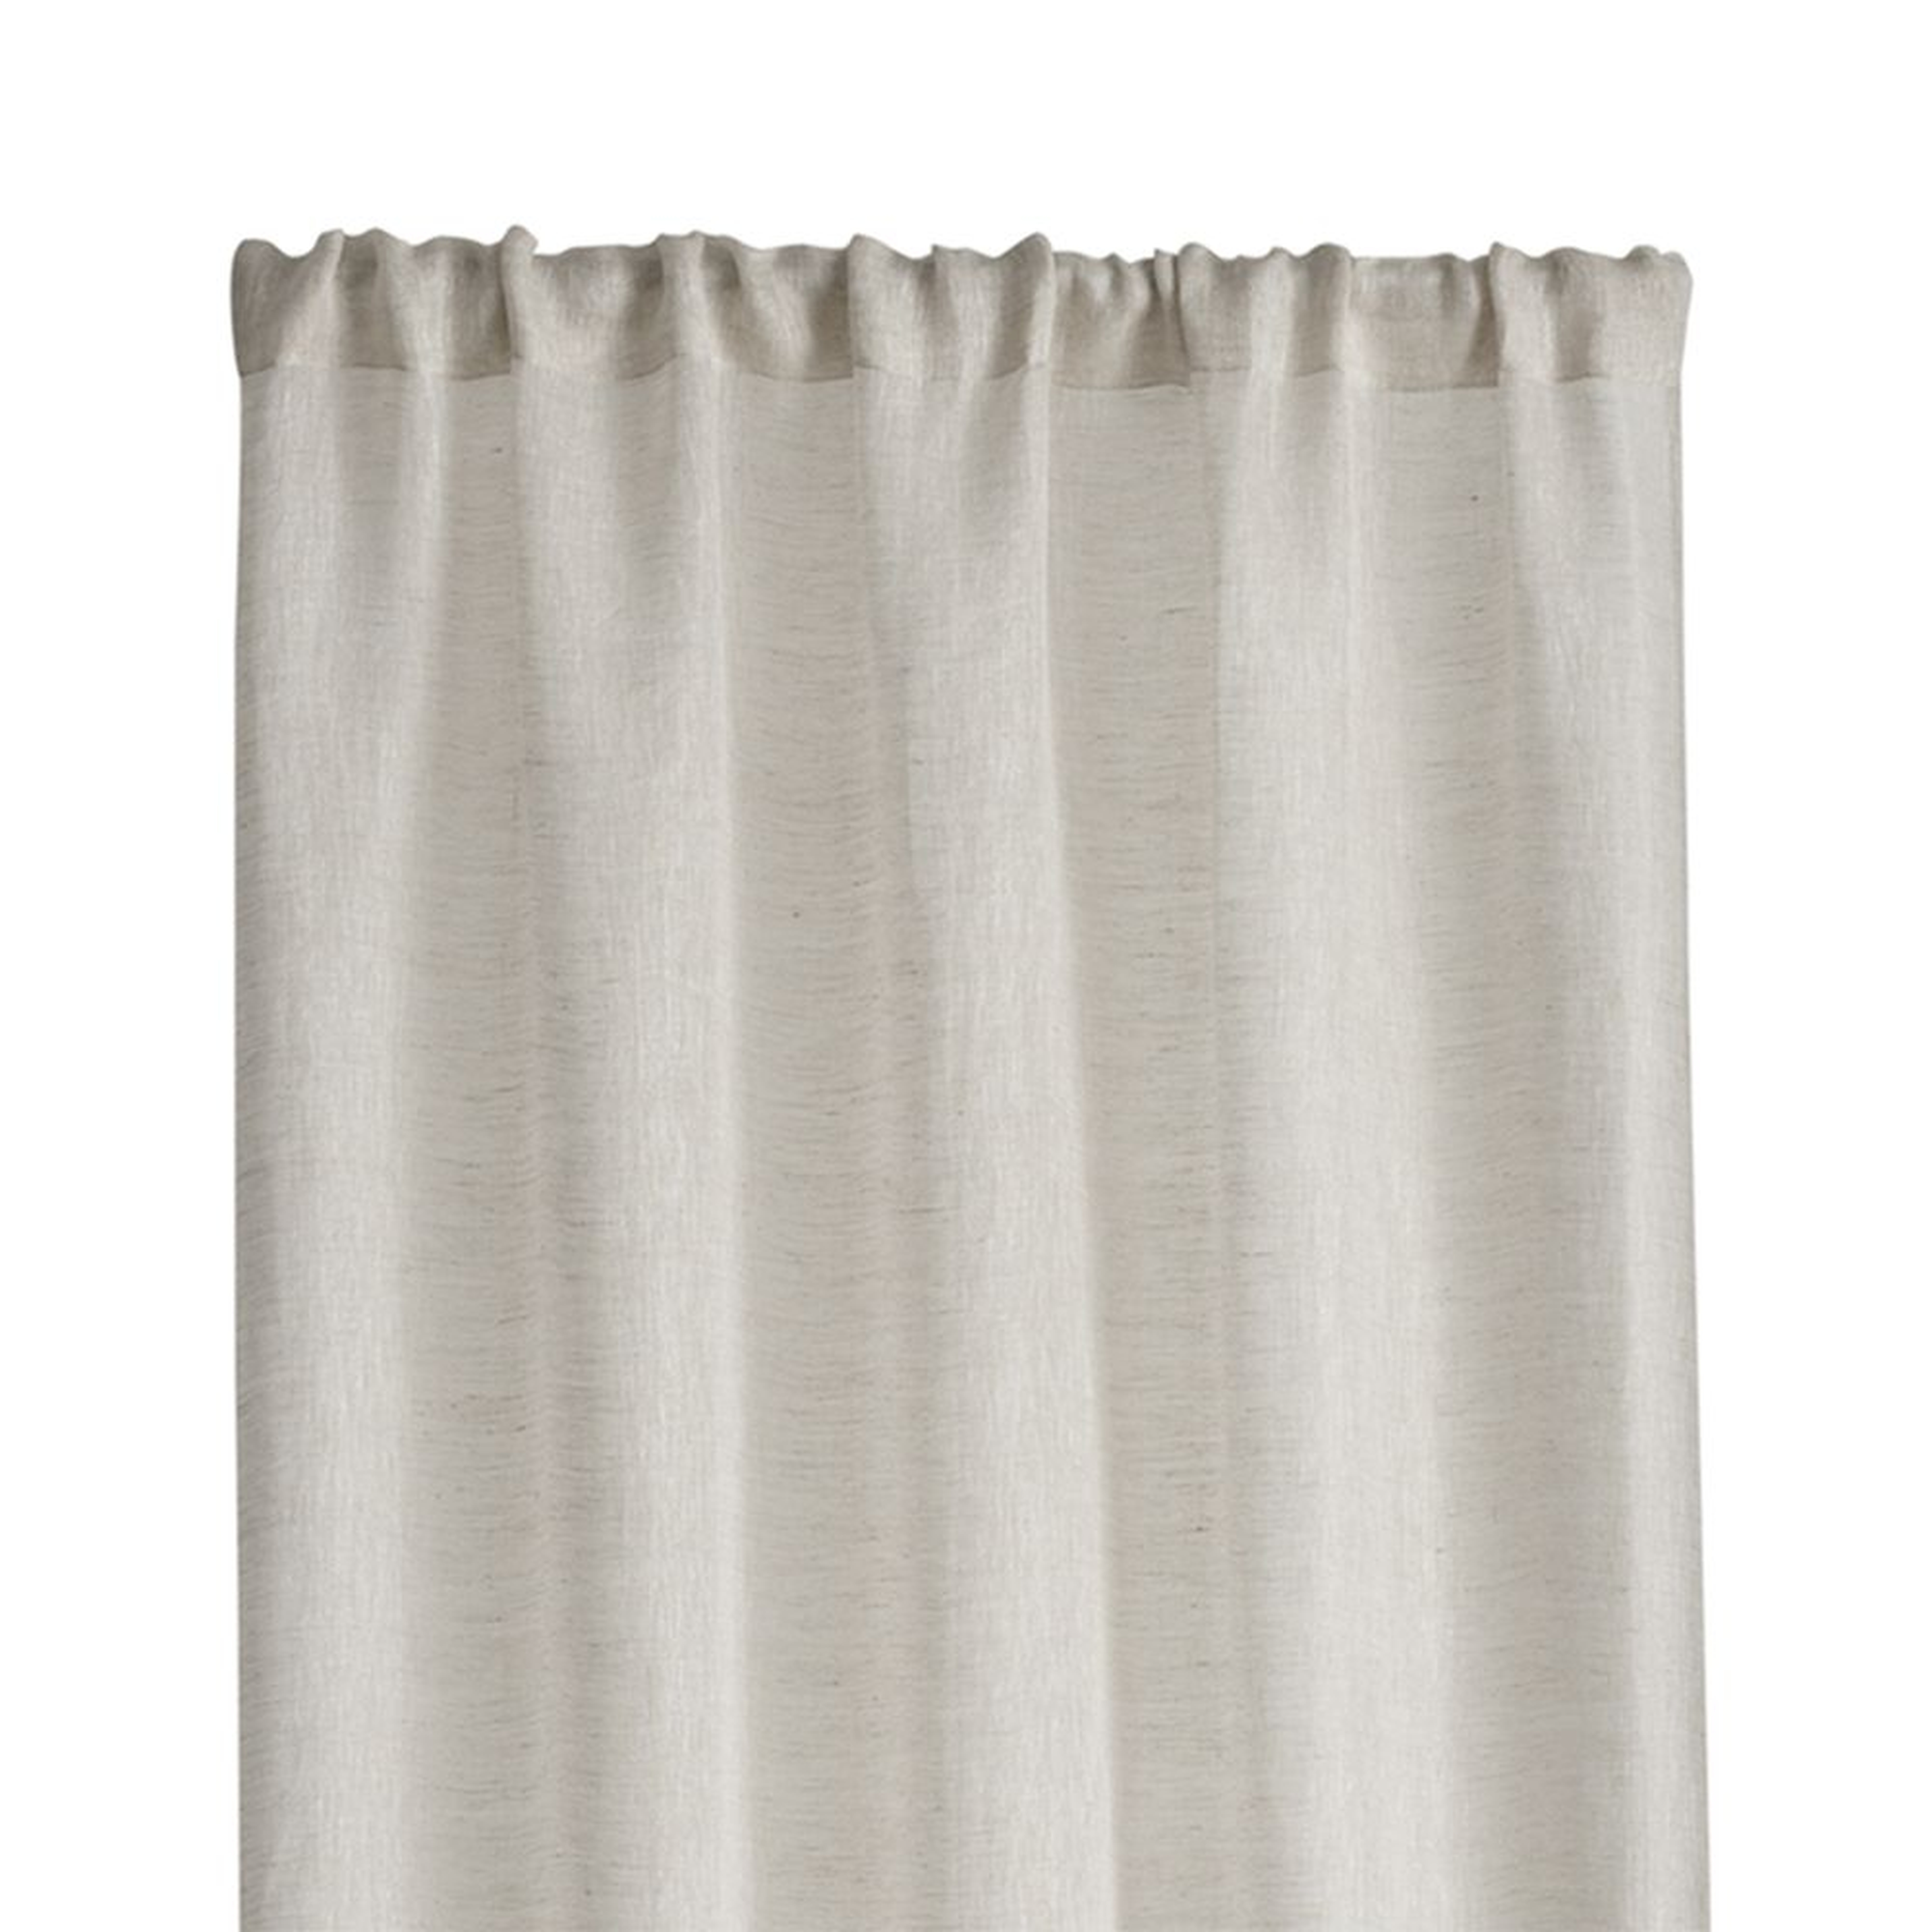 Linen Sheer 52"x84" Natural Curtain Panel - Crate and Barrel